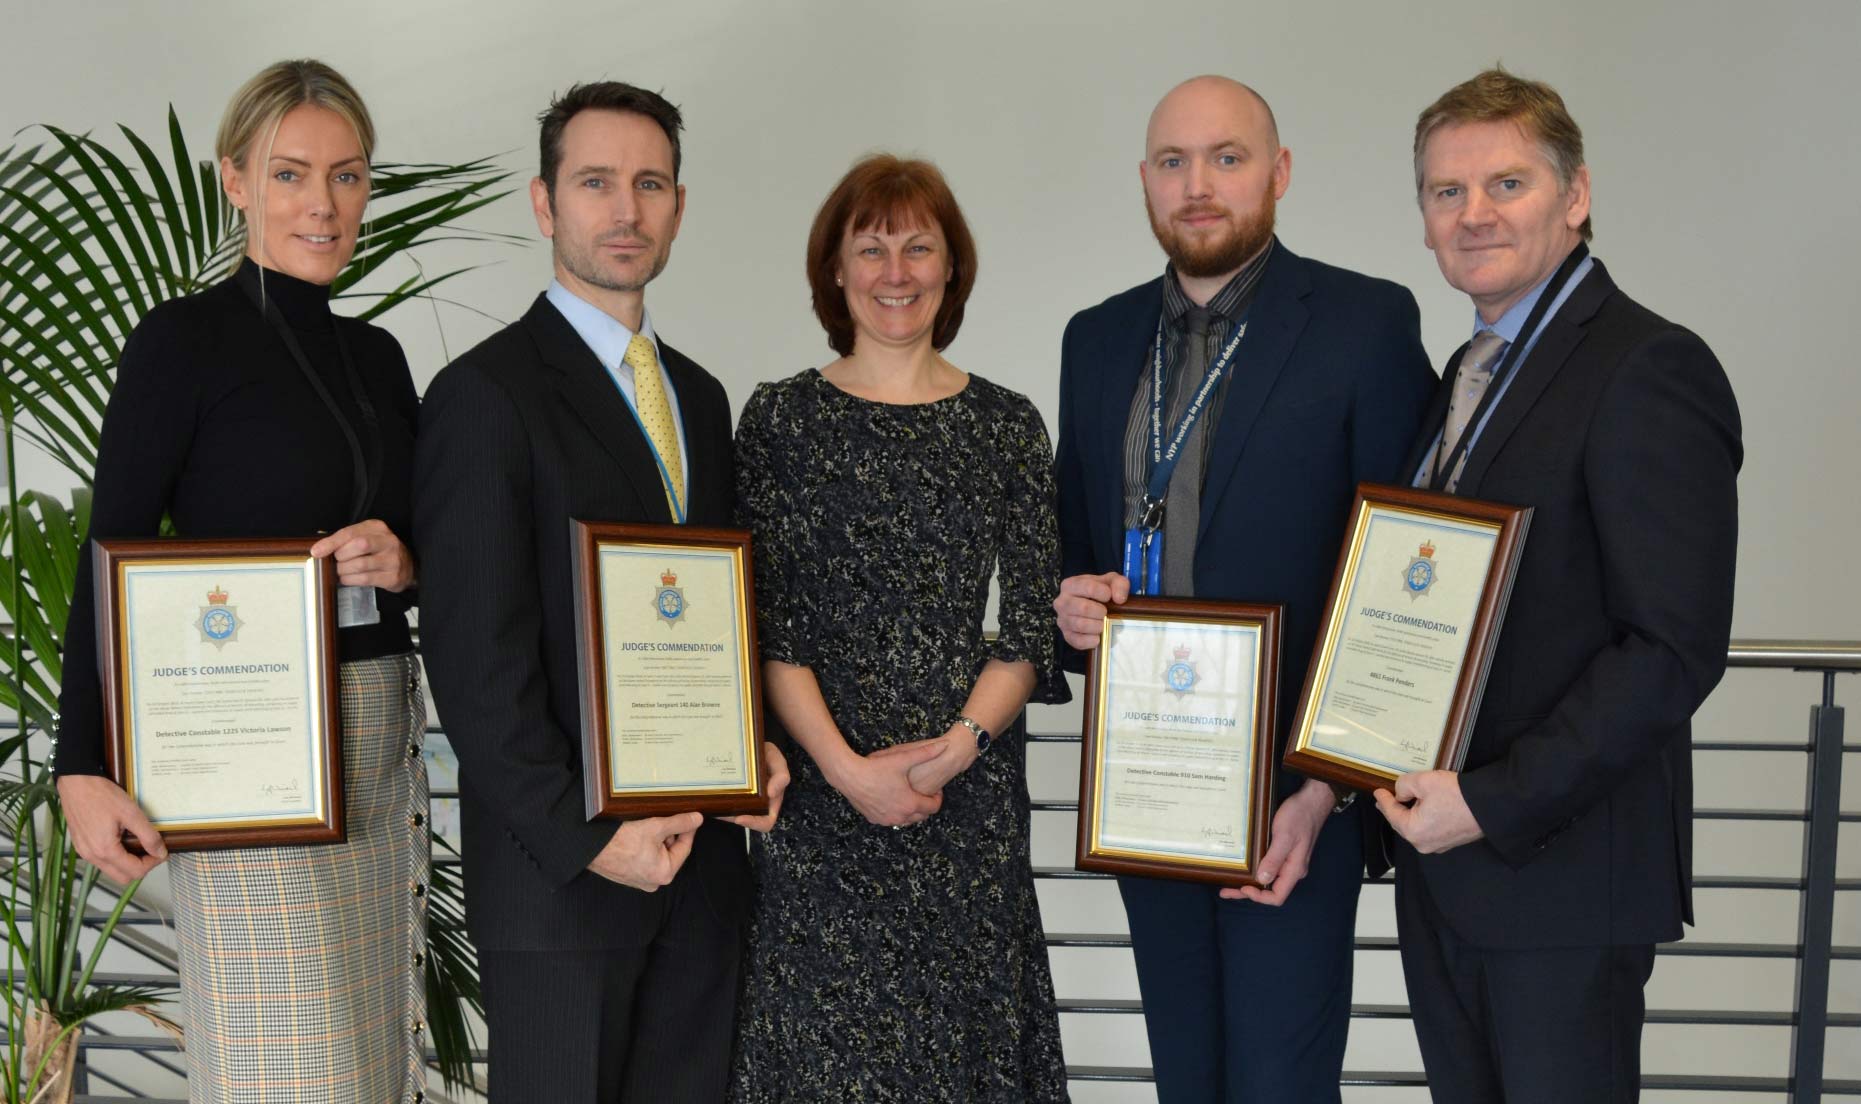 Detective Sergeant Alan Browne, Detective Constables Victoria Lawson and Sam Harding, and Police Staff Investigator, Frank Penders, were presented with their commendation by Chief Constable Lisa Winward at Harrogate police station on 15 January 2019